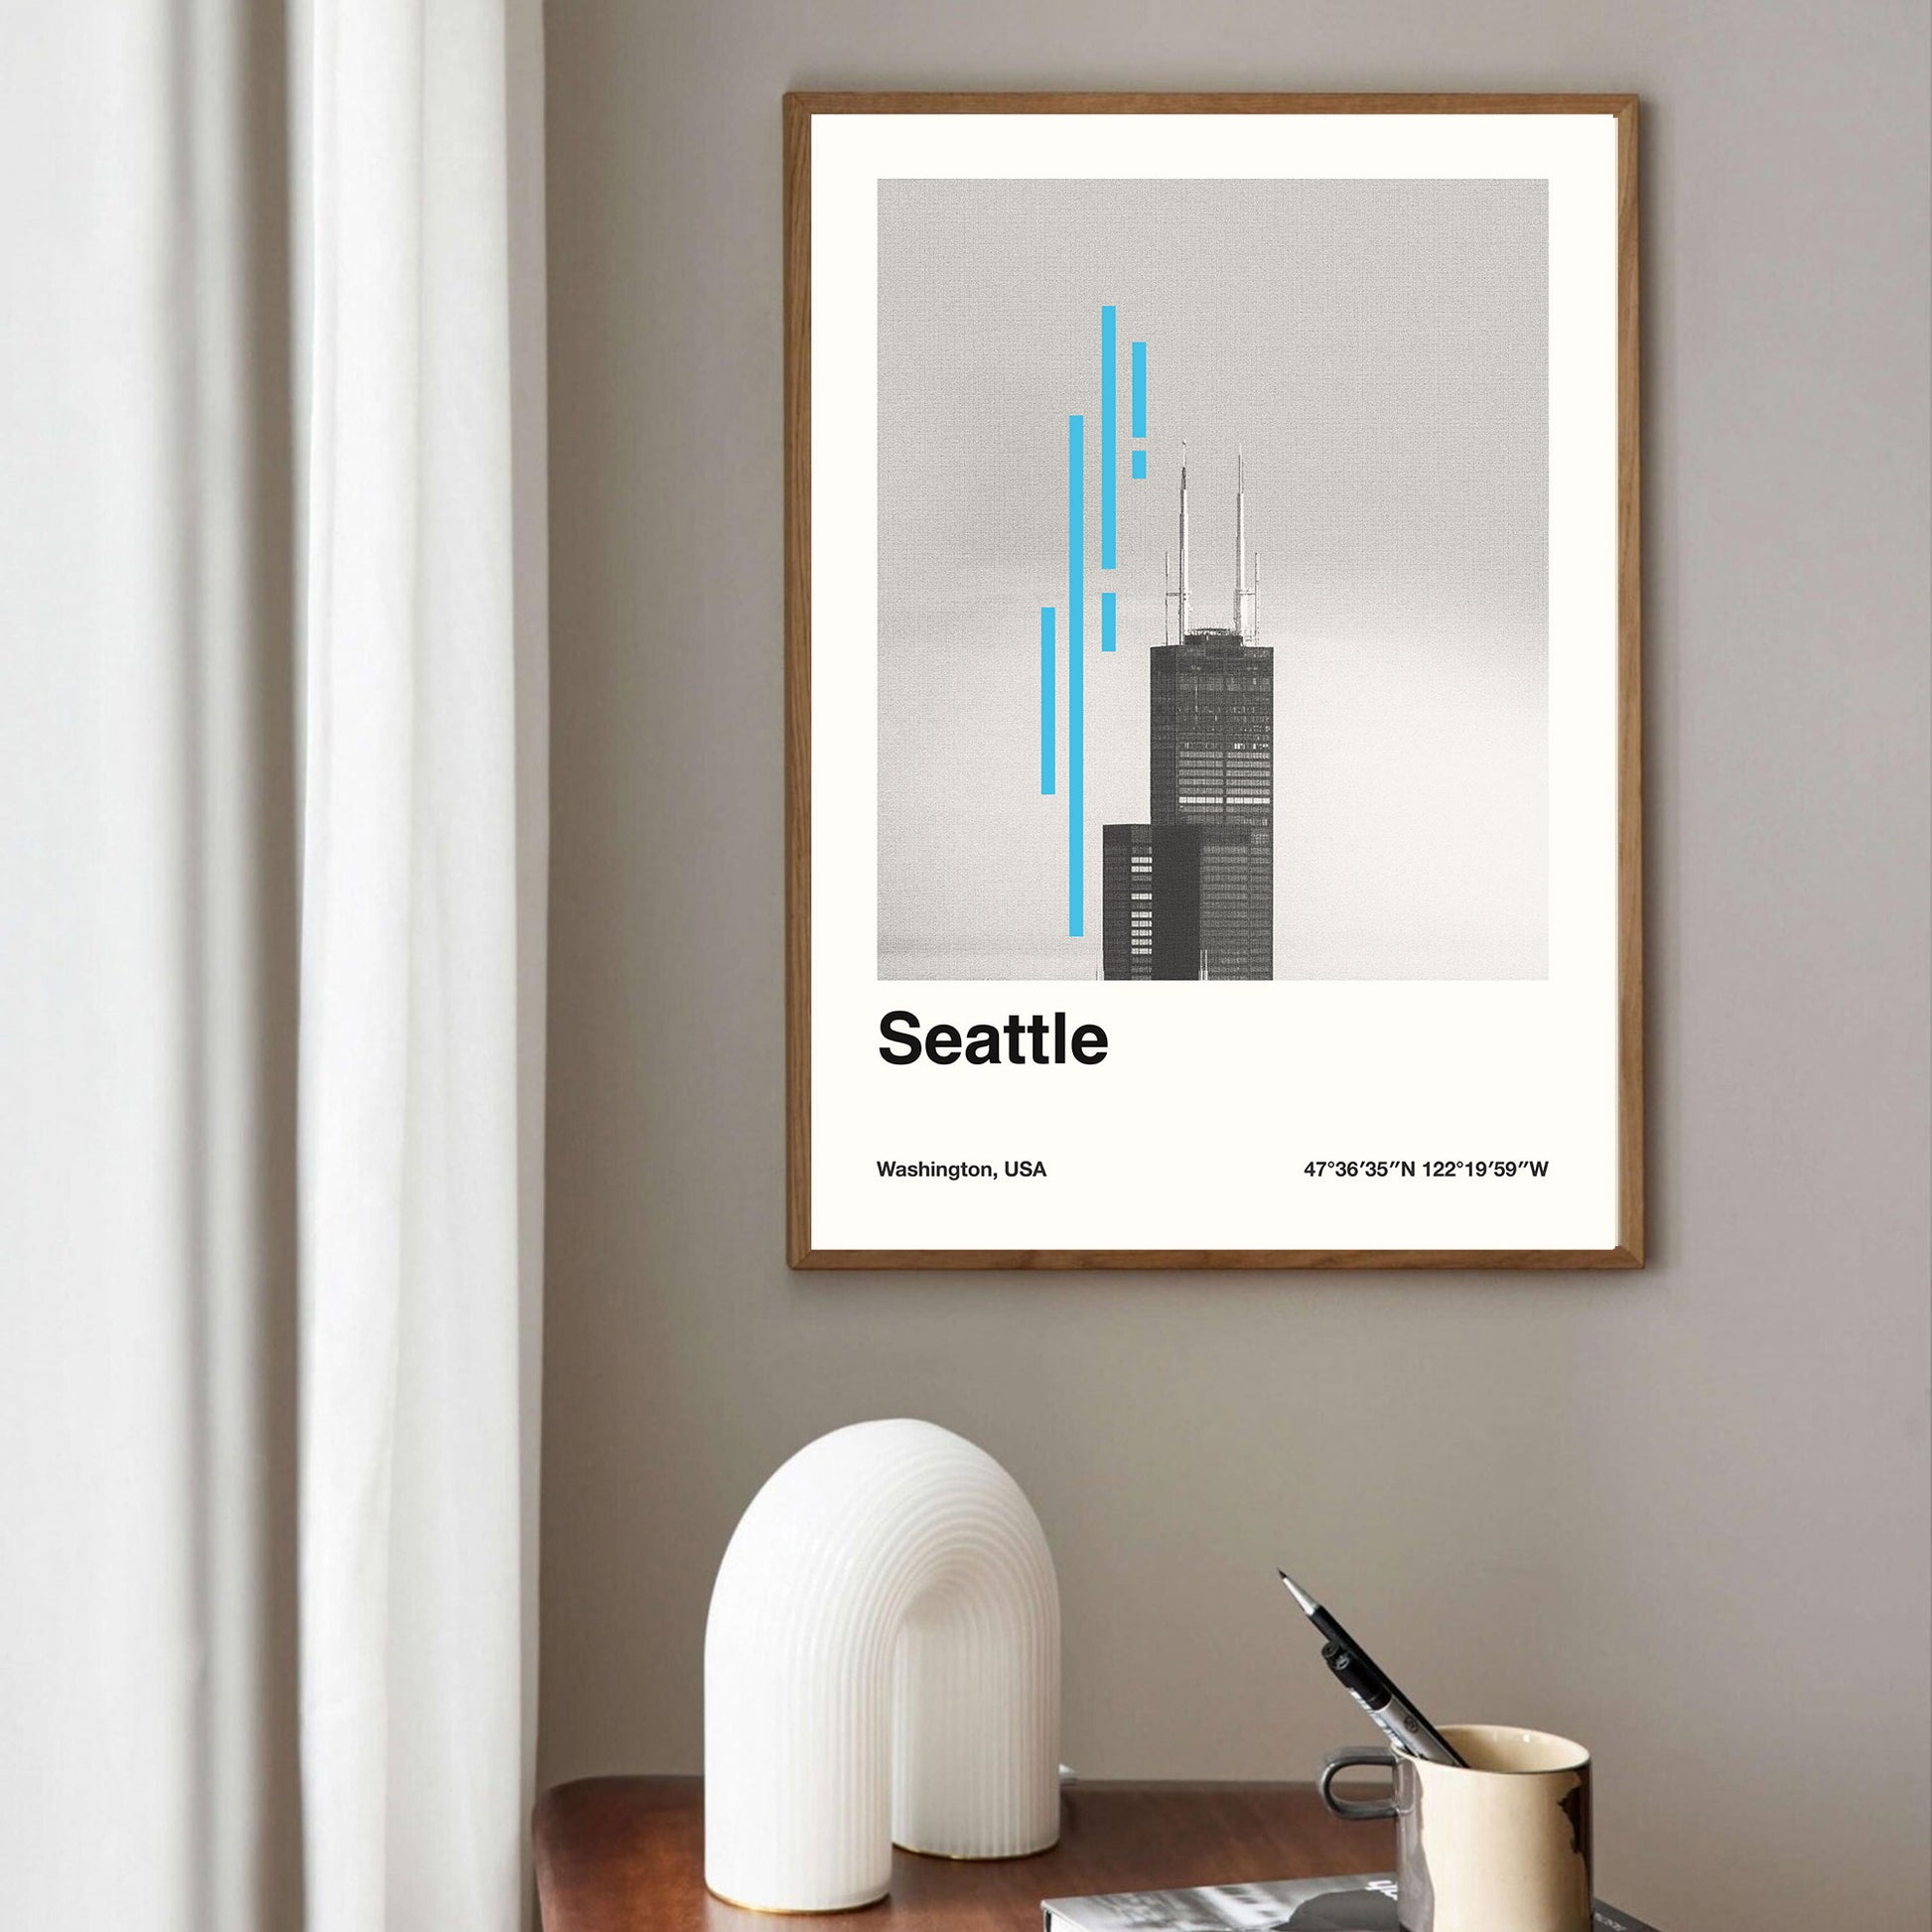 A framed poster of the Seattle skyline by thewallflowerclub.